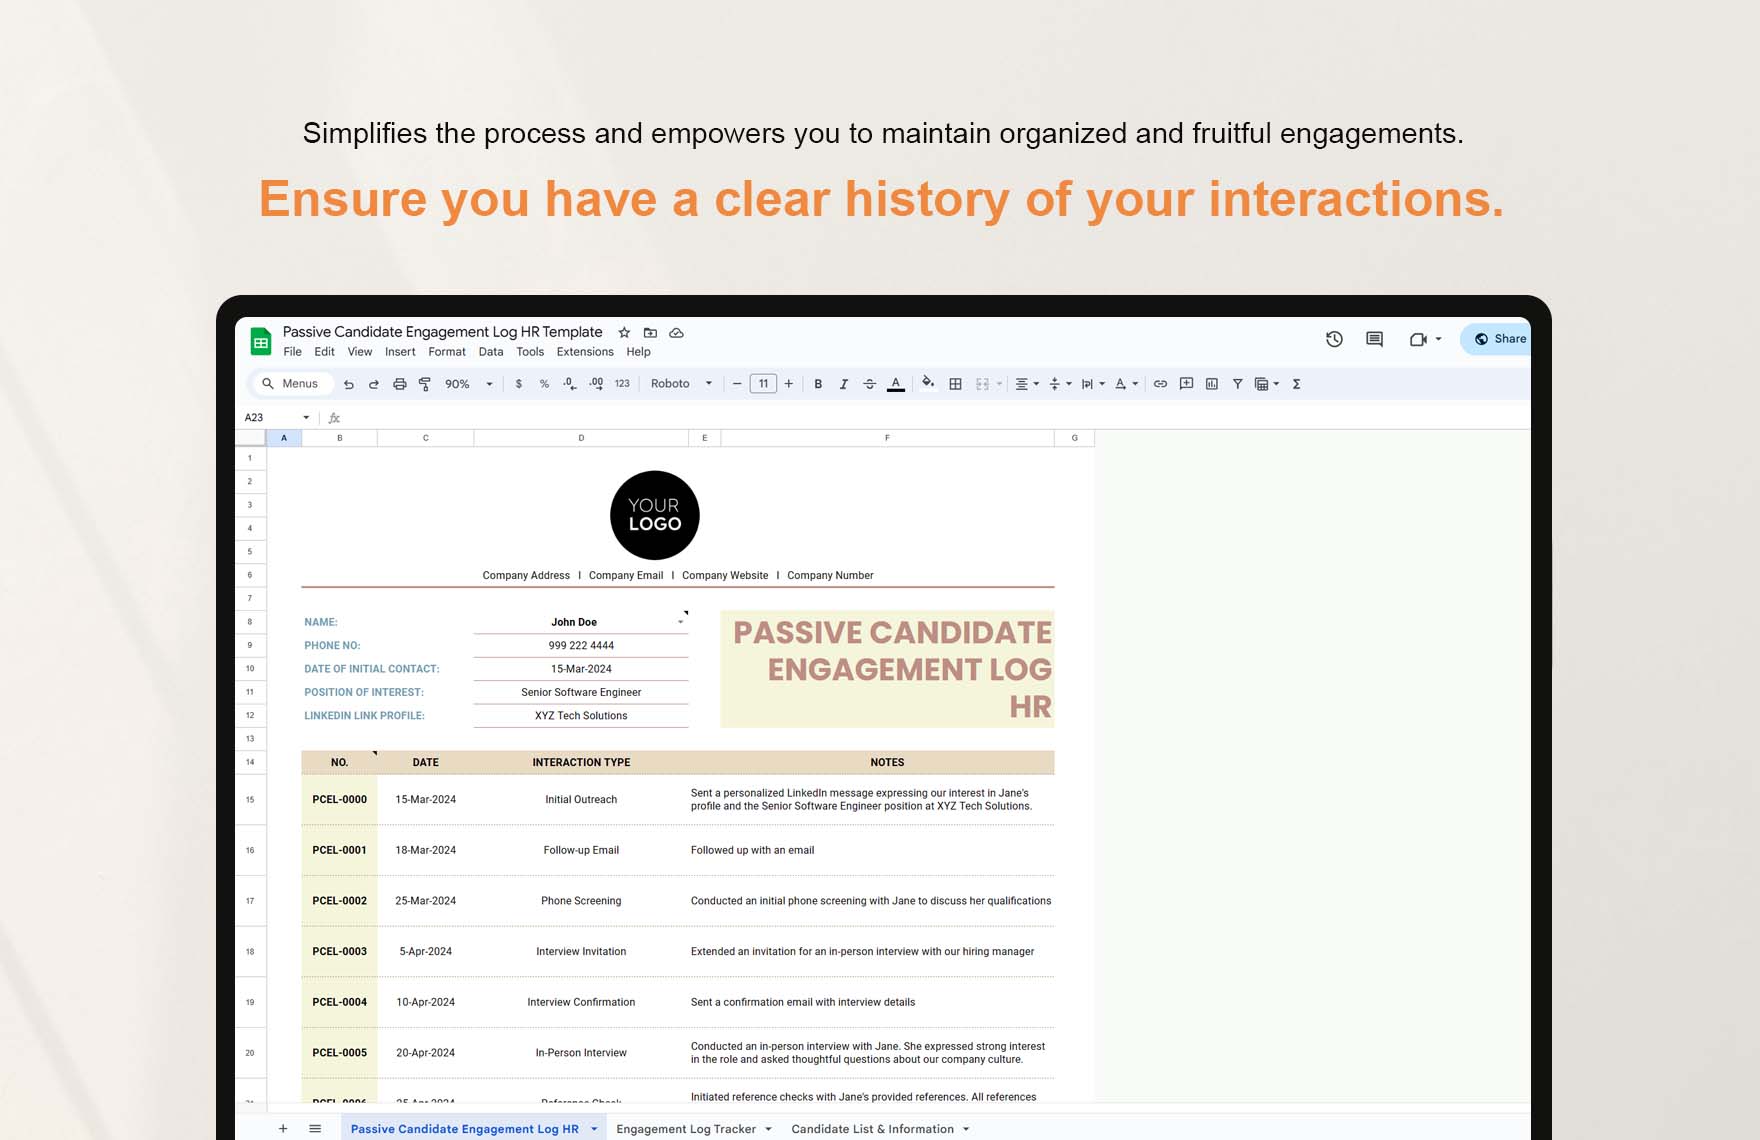 Passive Candidate Engagement Log HR Template